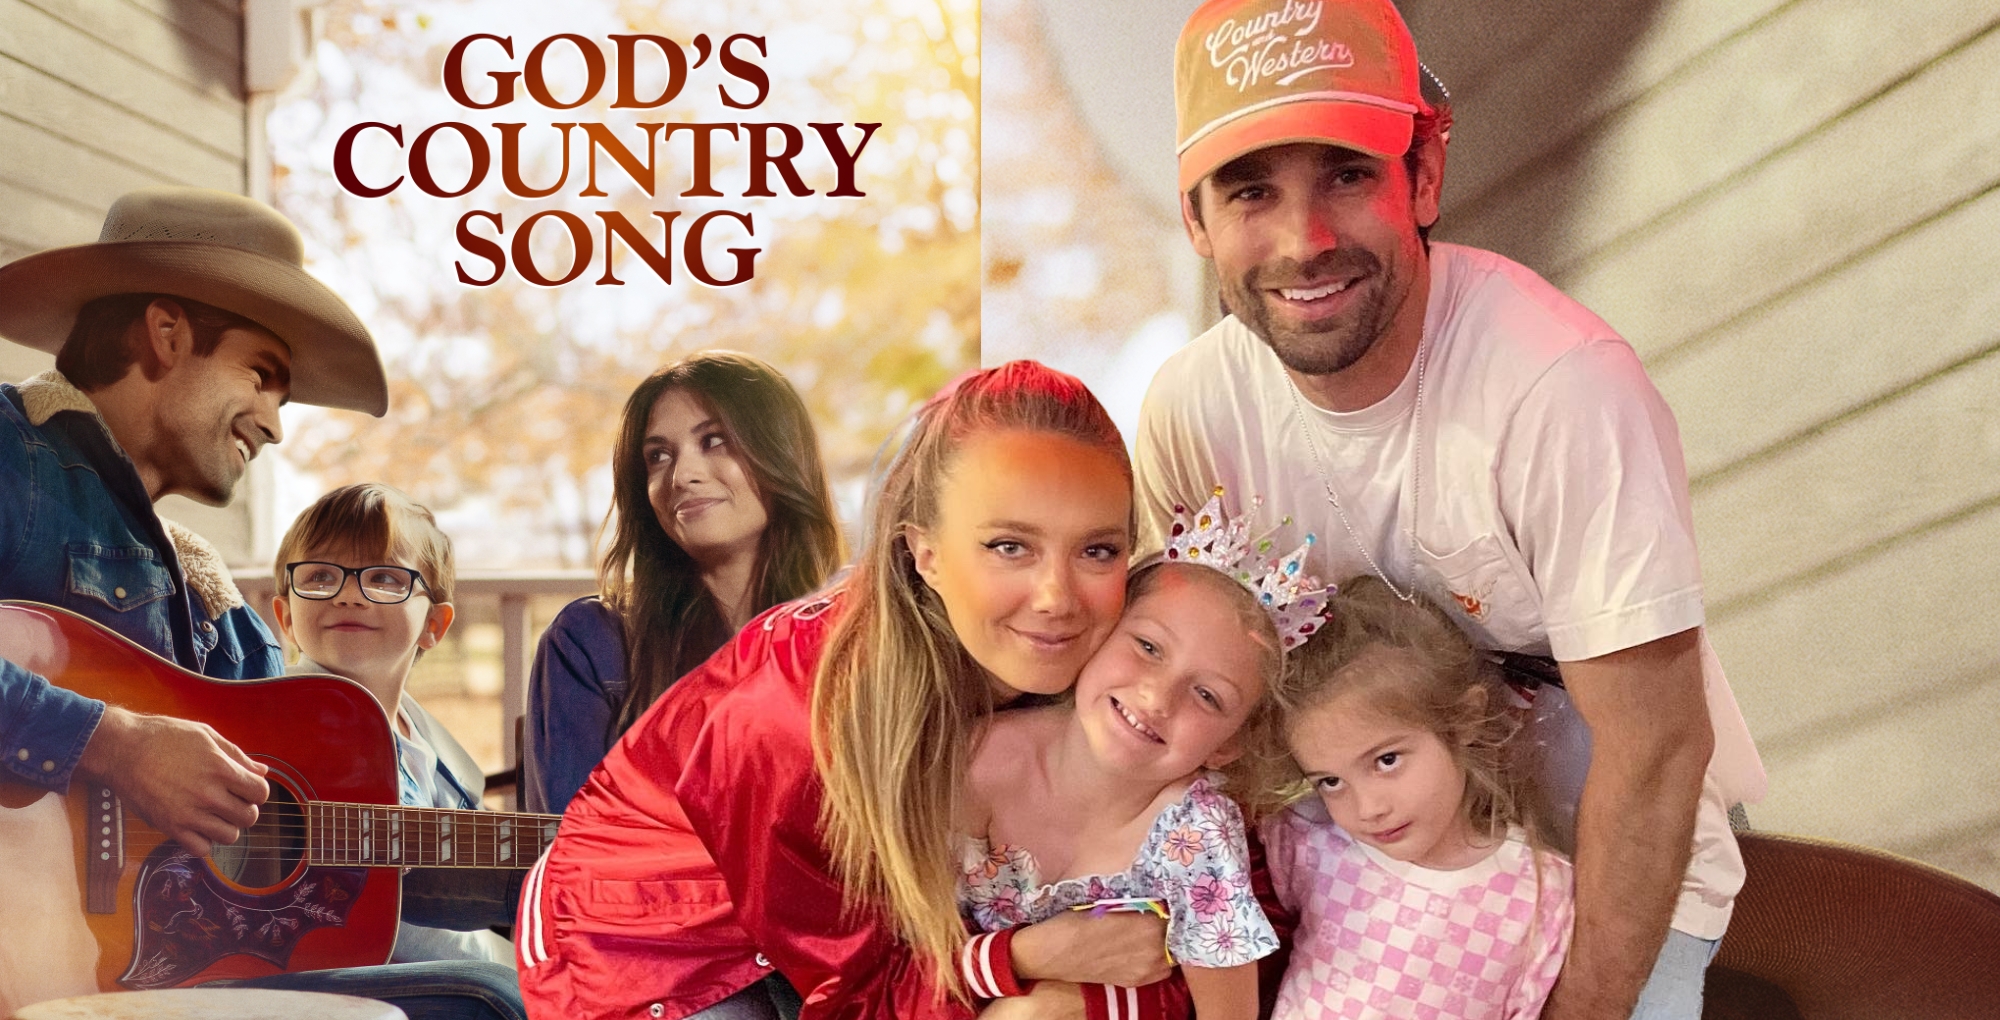 y&r star justin gaston stars in god's country song.